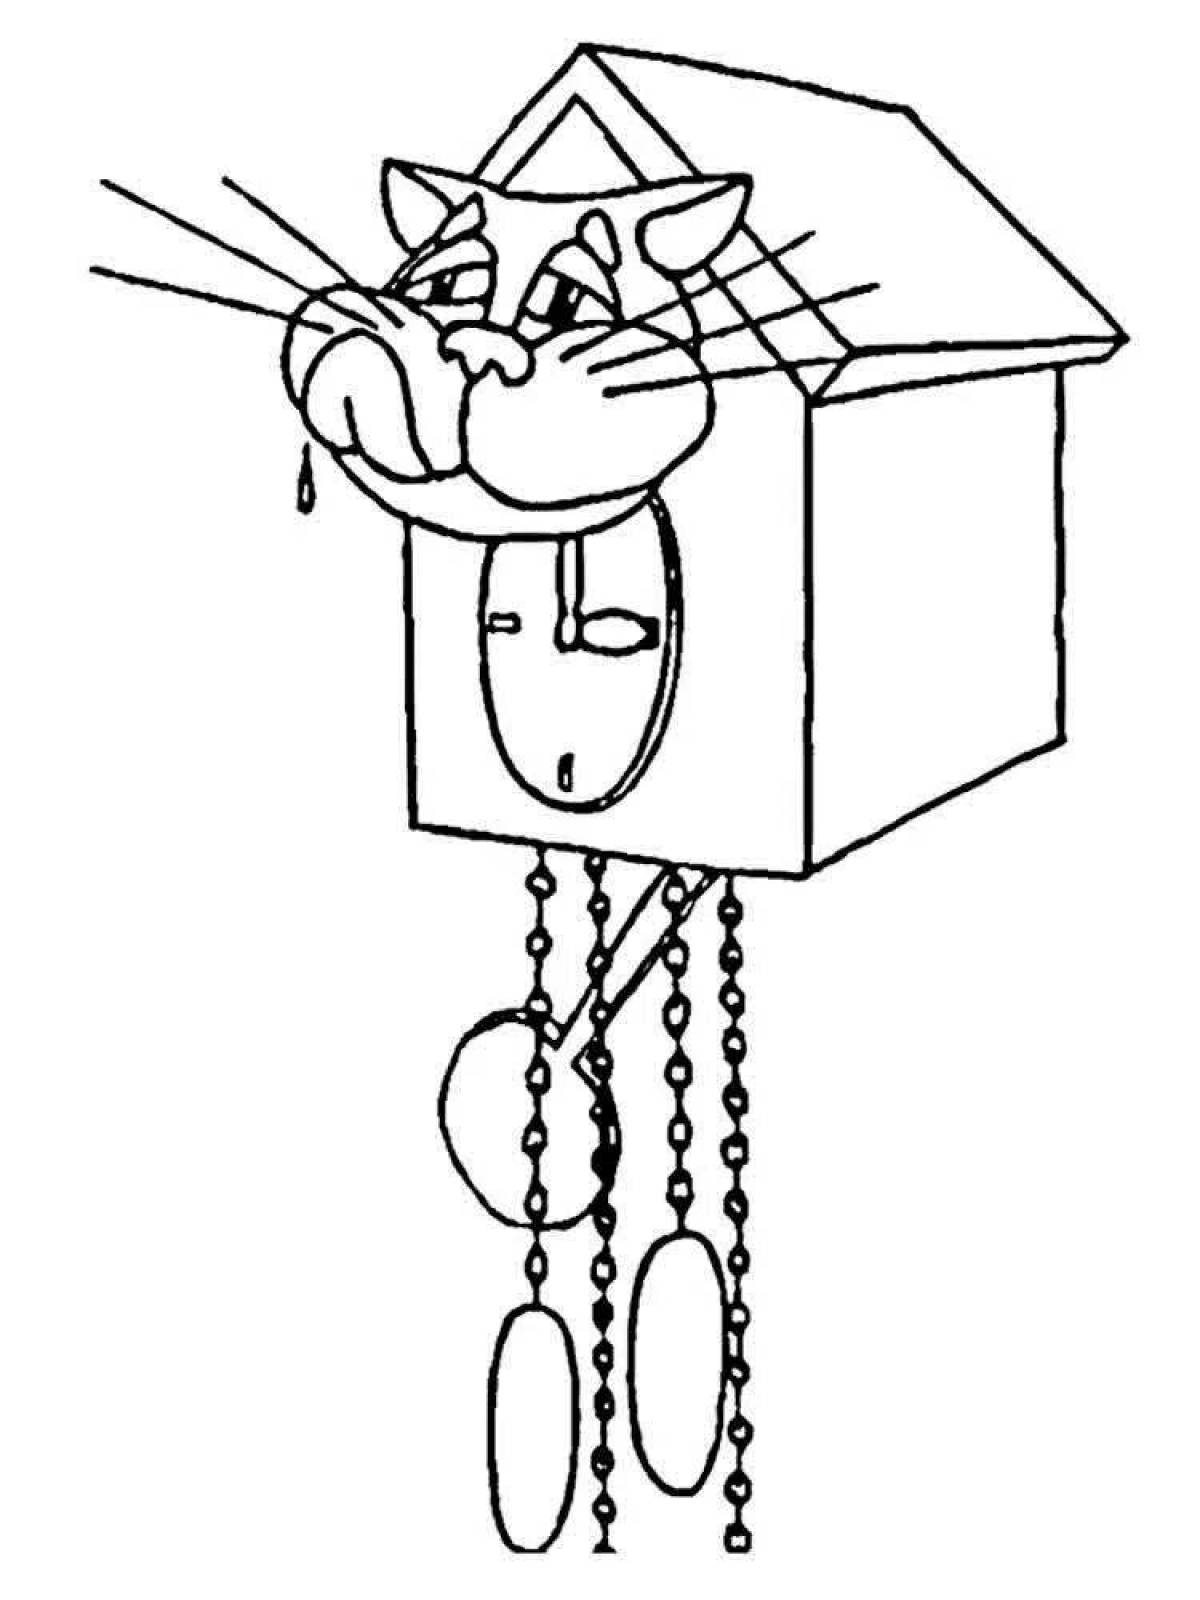 Playful cuckoo clock coloring page